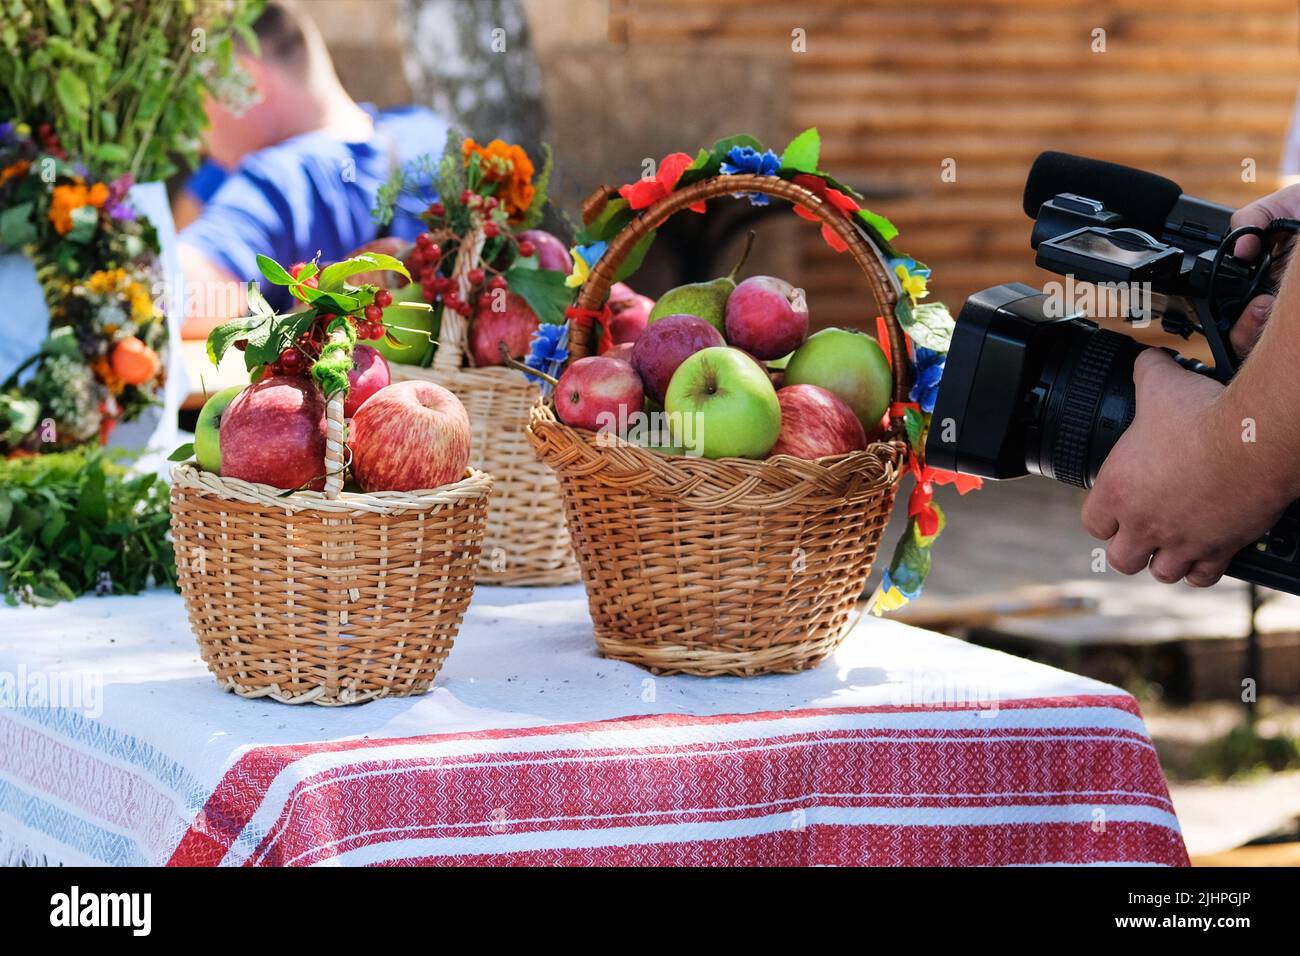 Filming a video of apples in wicker baskets in a peasant style. Rural blogging. Stock Photo